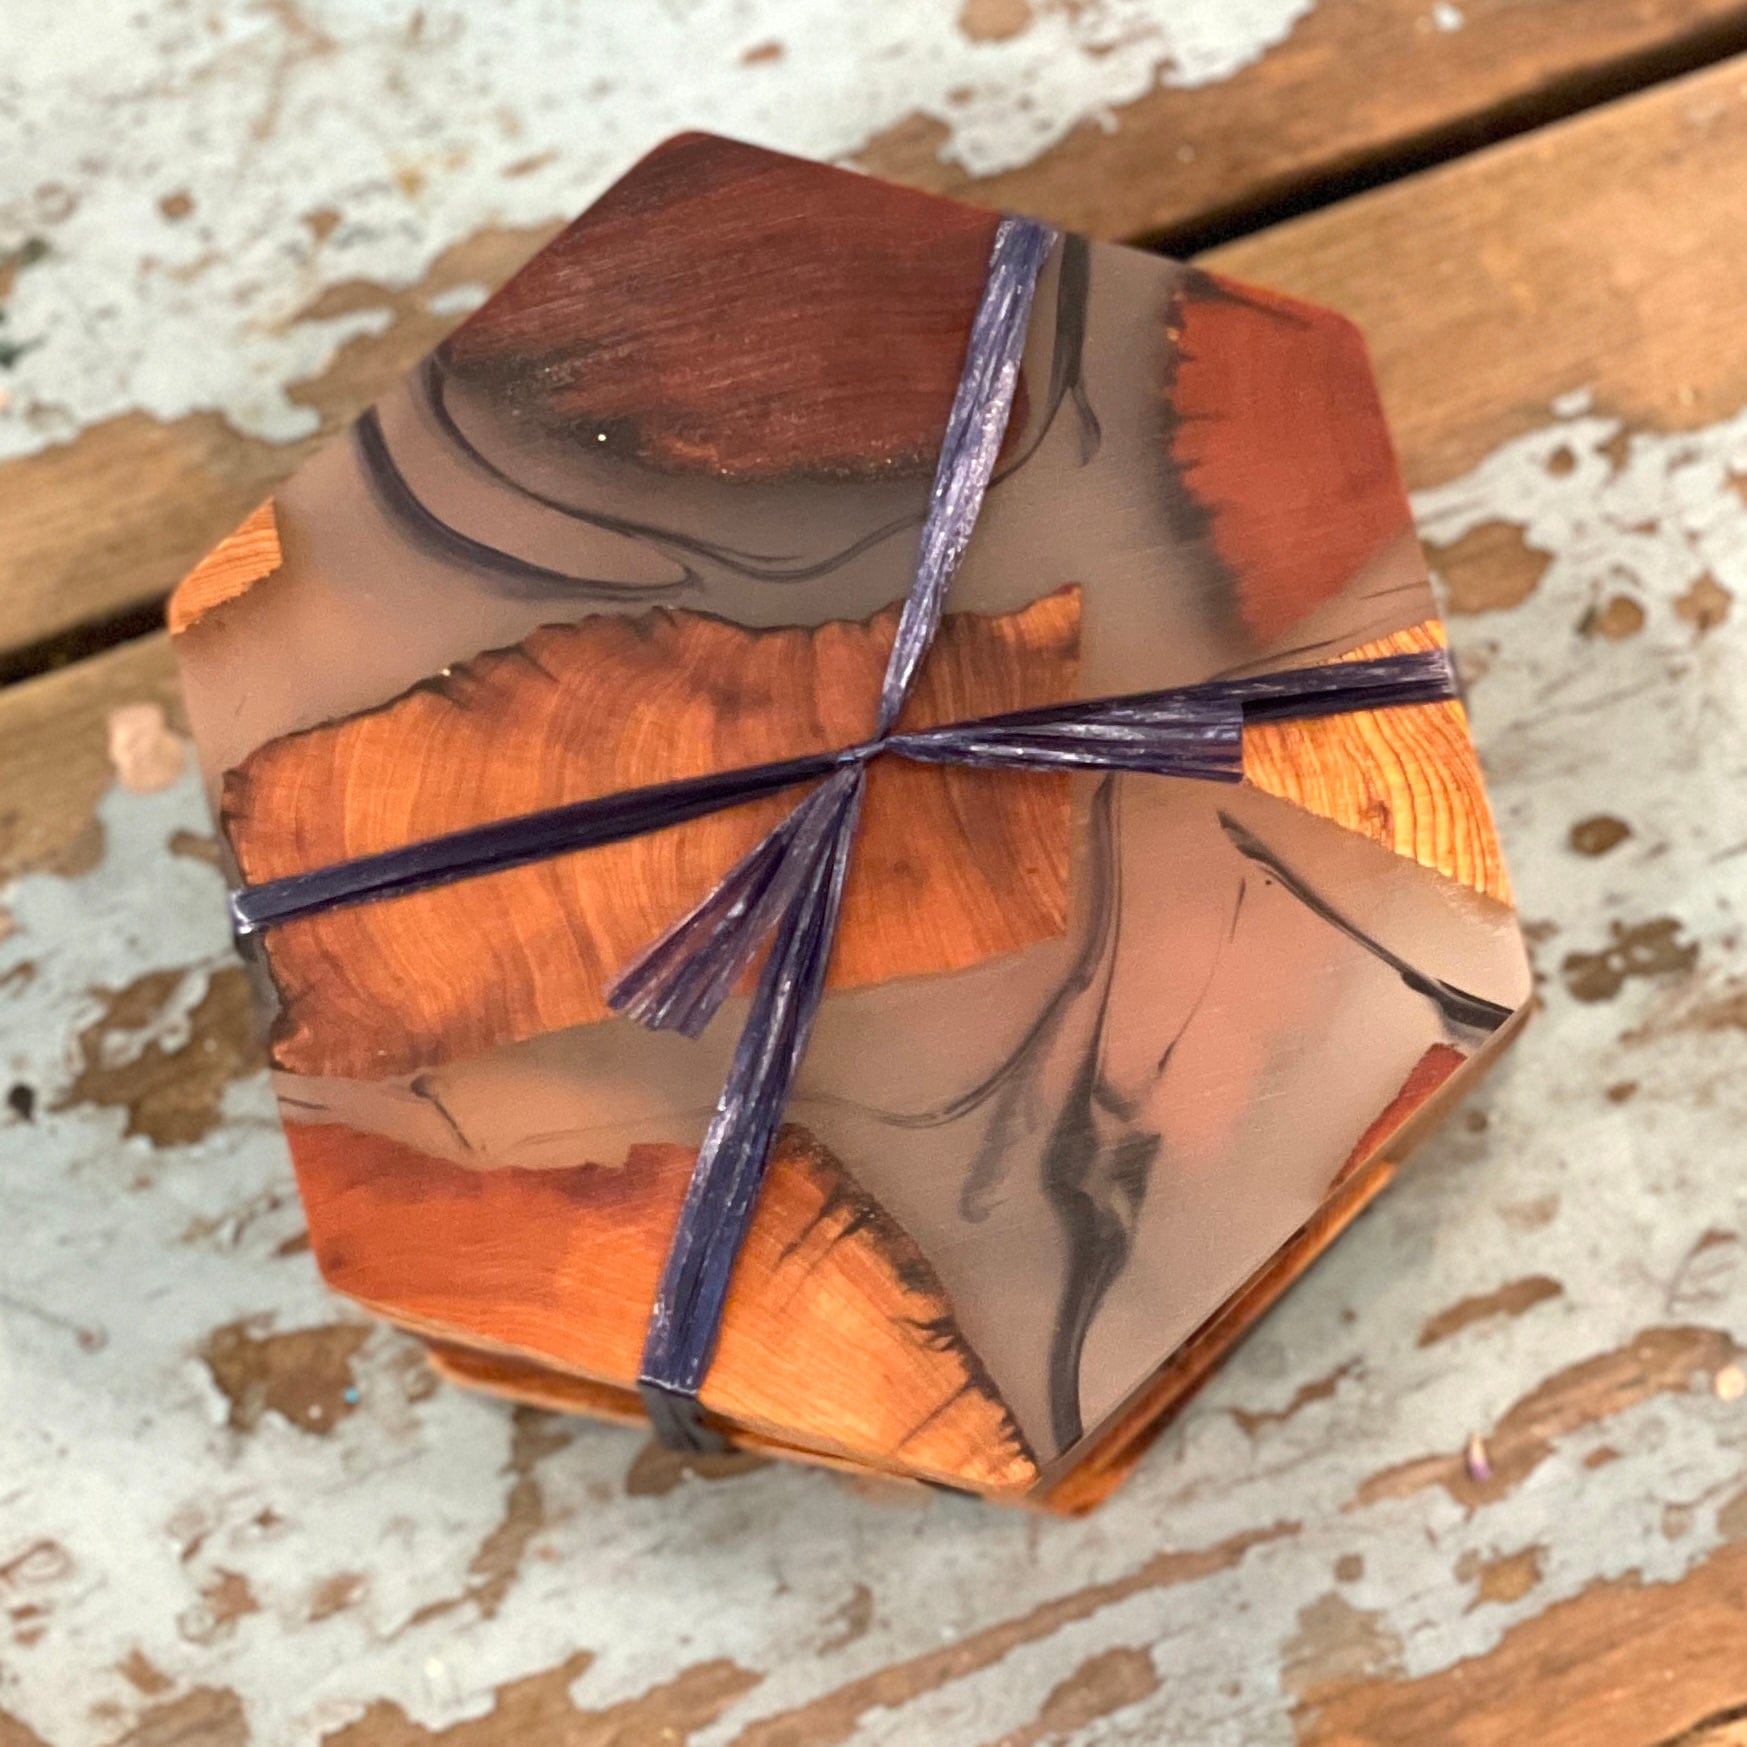 Wooden Resin Coasters - Set of 4